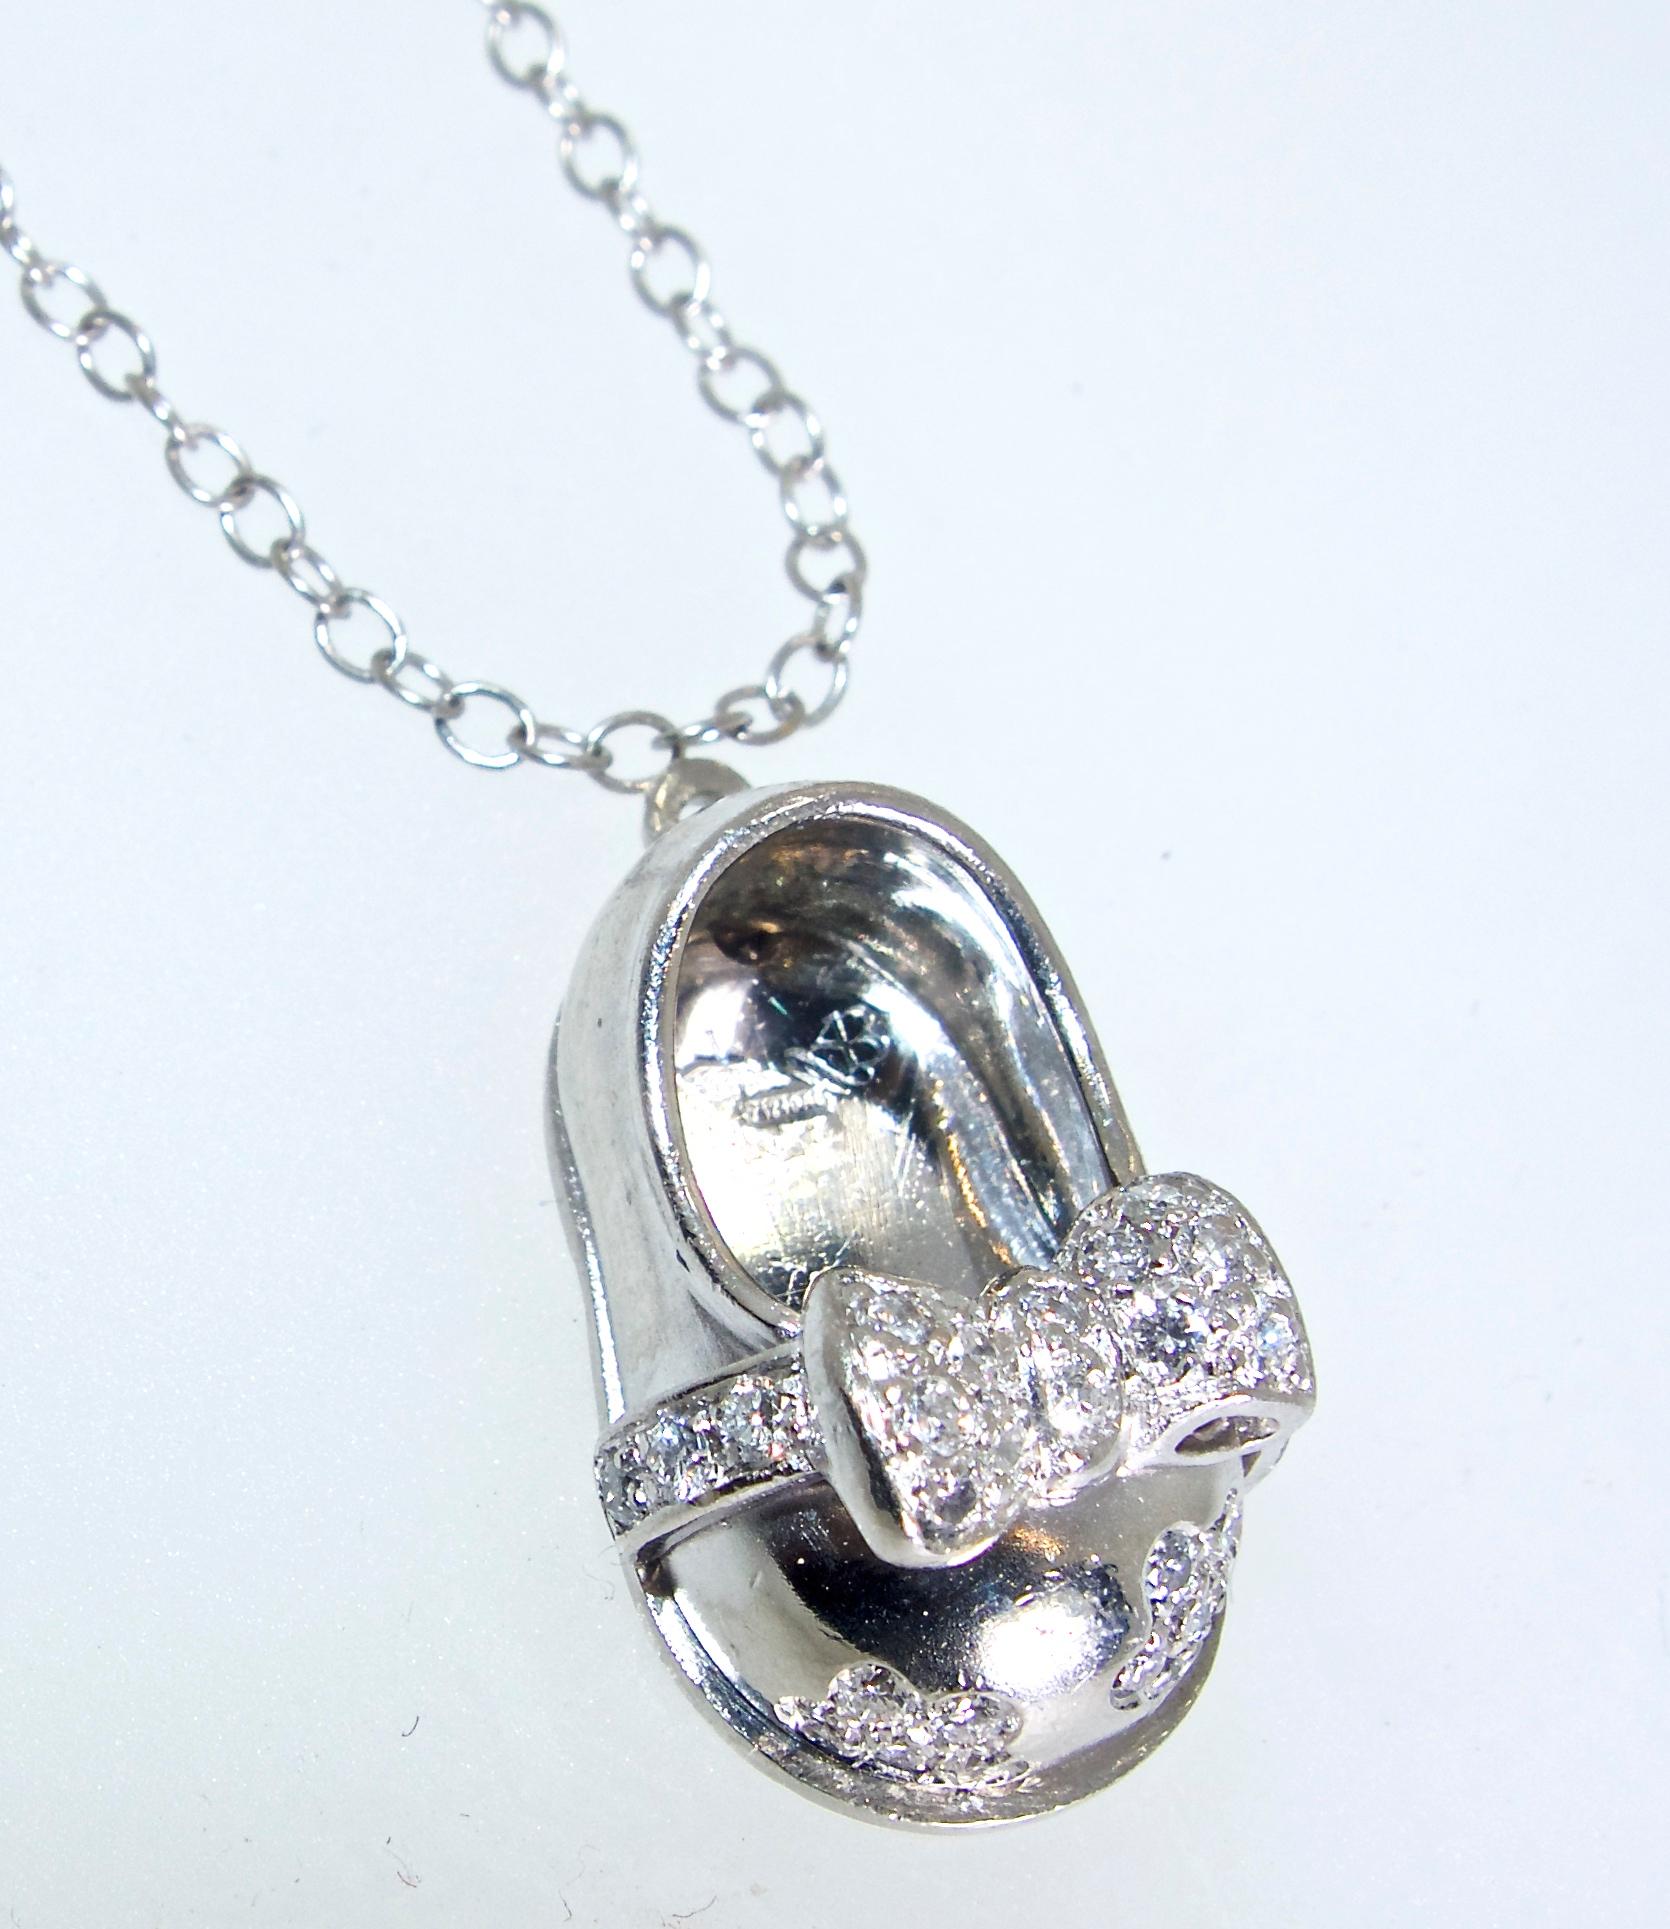 Baby shoe pendant with diamonds in platinum, this pendant on a white gold chain is one inch by one-half inch.  The delicate diamonds are all H/VS1.  New condition by Aaron Basha.